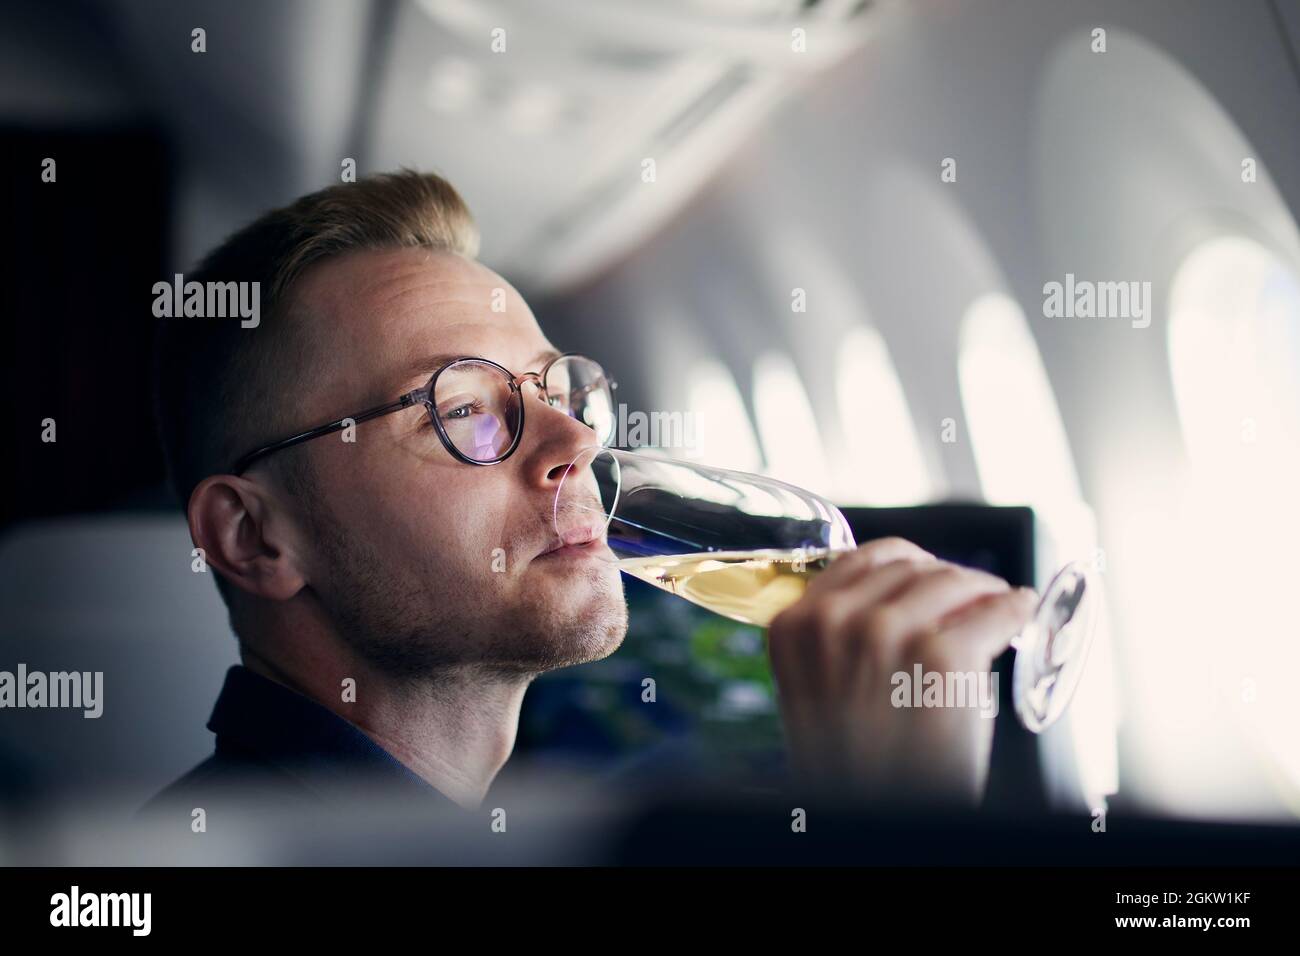 Business travel by airplane. Man looking through window and drinking champagne during flight. Stock Photo